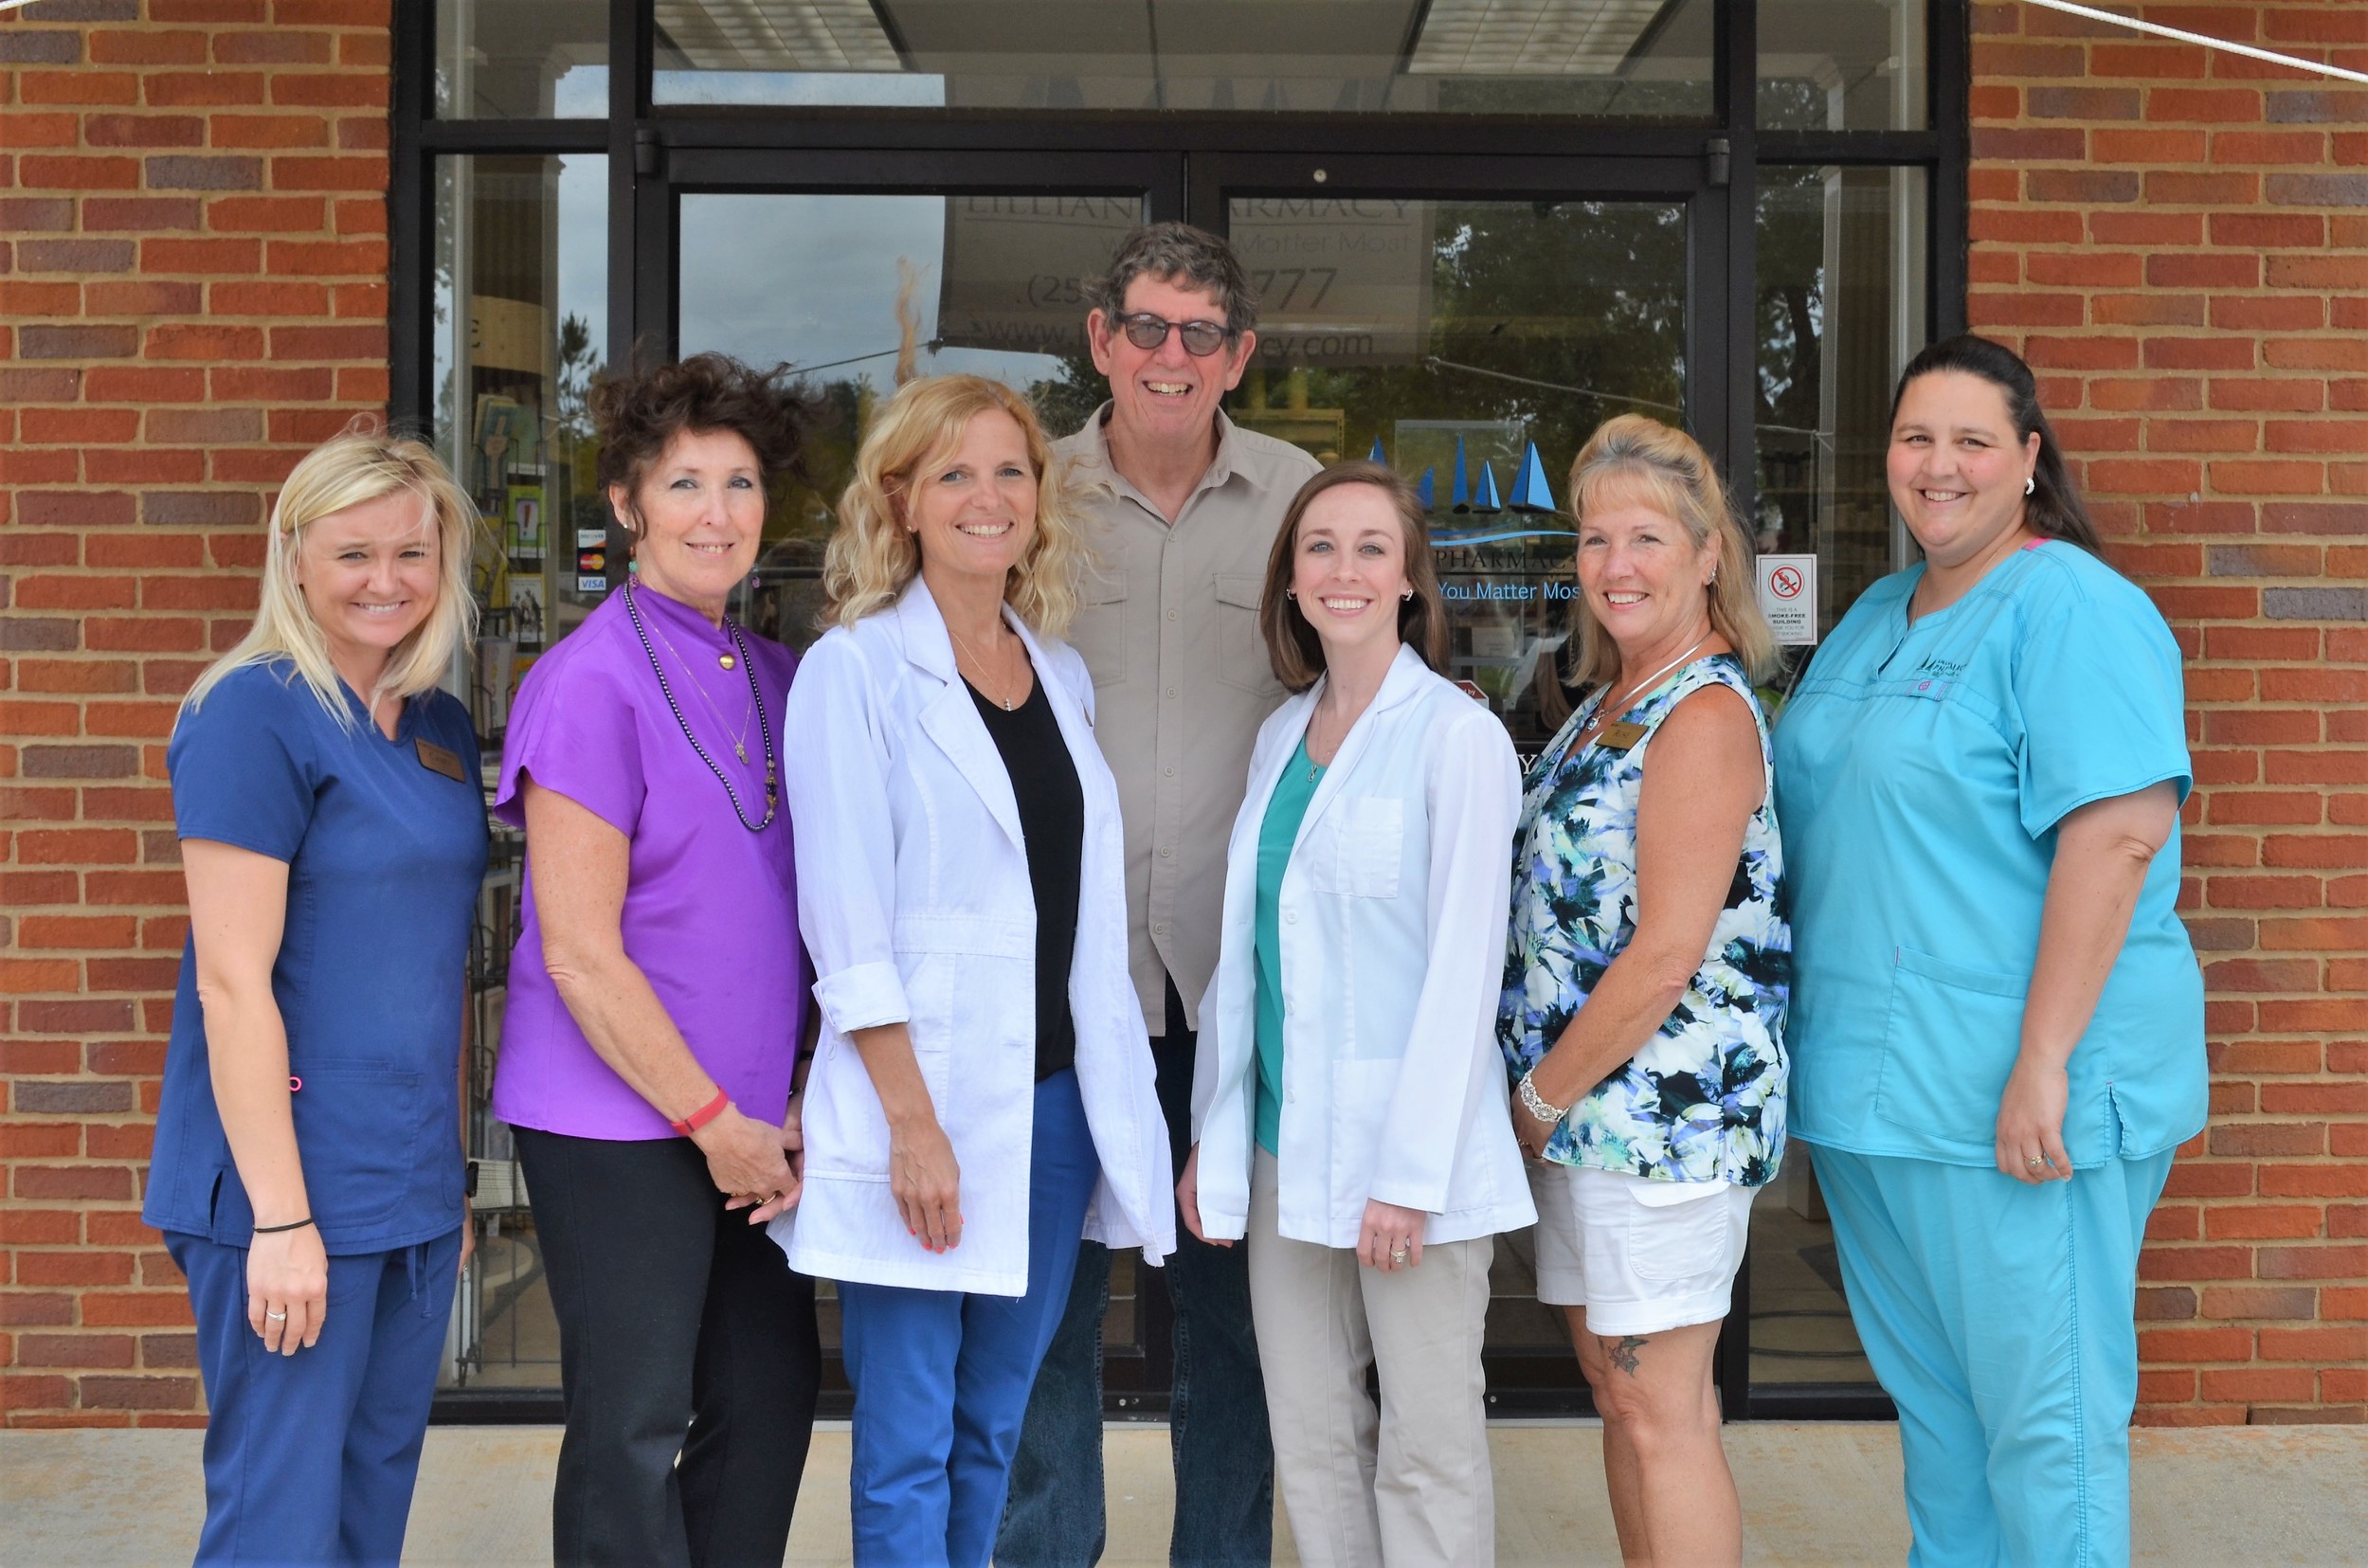 The Lillian Pharmacy Staff, left to right: Casey Dean, Stormi Stallings, Stacy Davis, Steve Love, Carrie Ray, Rose Miller, and Mindy Nobles.